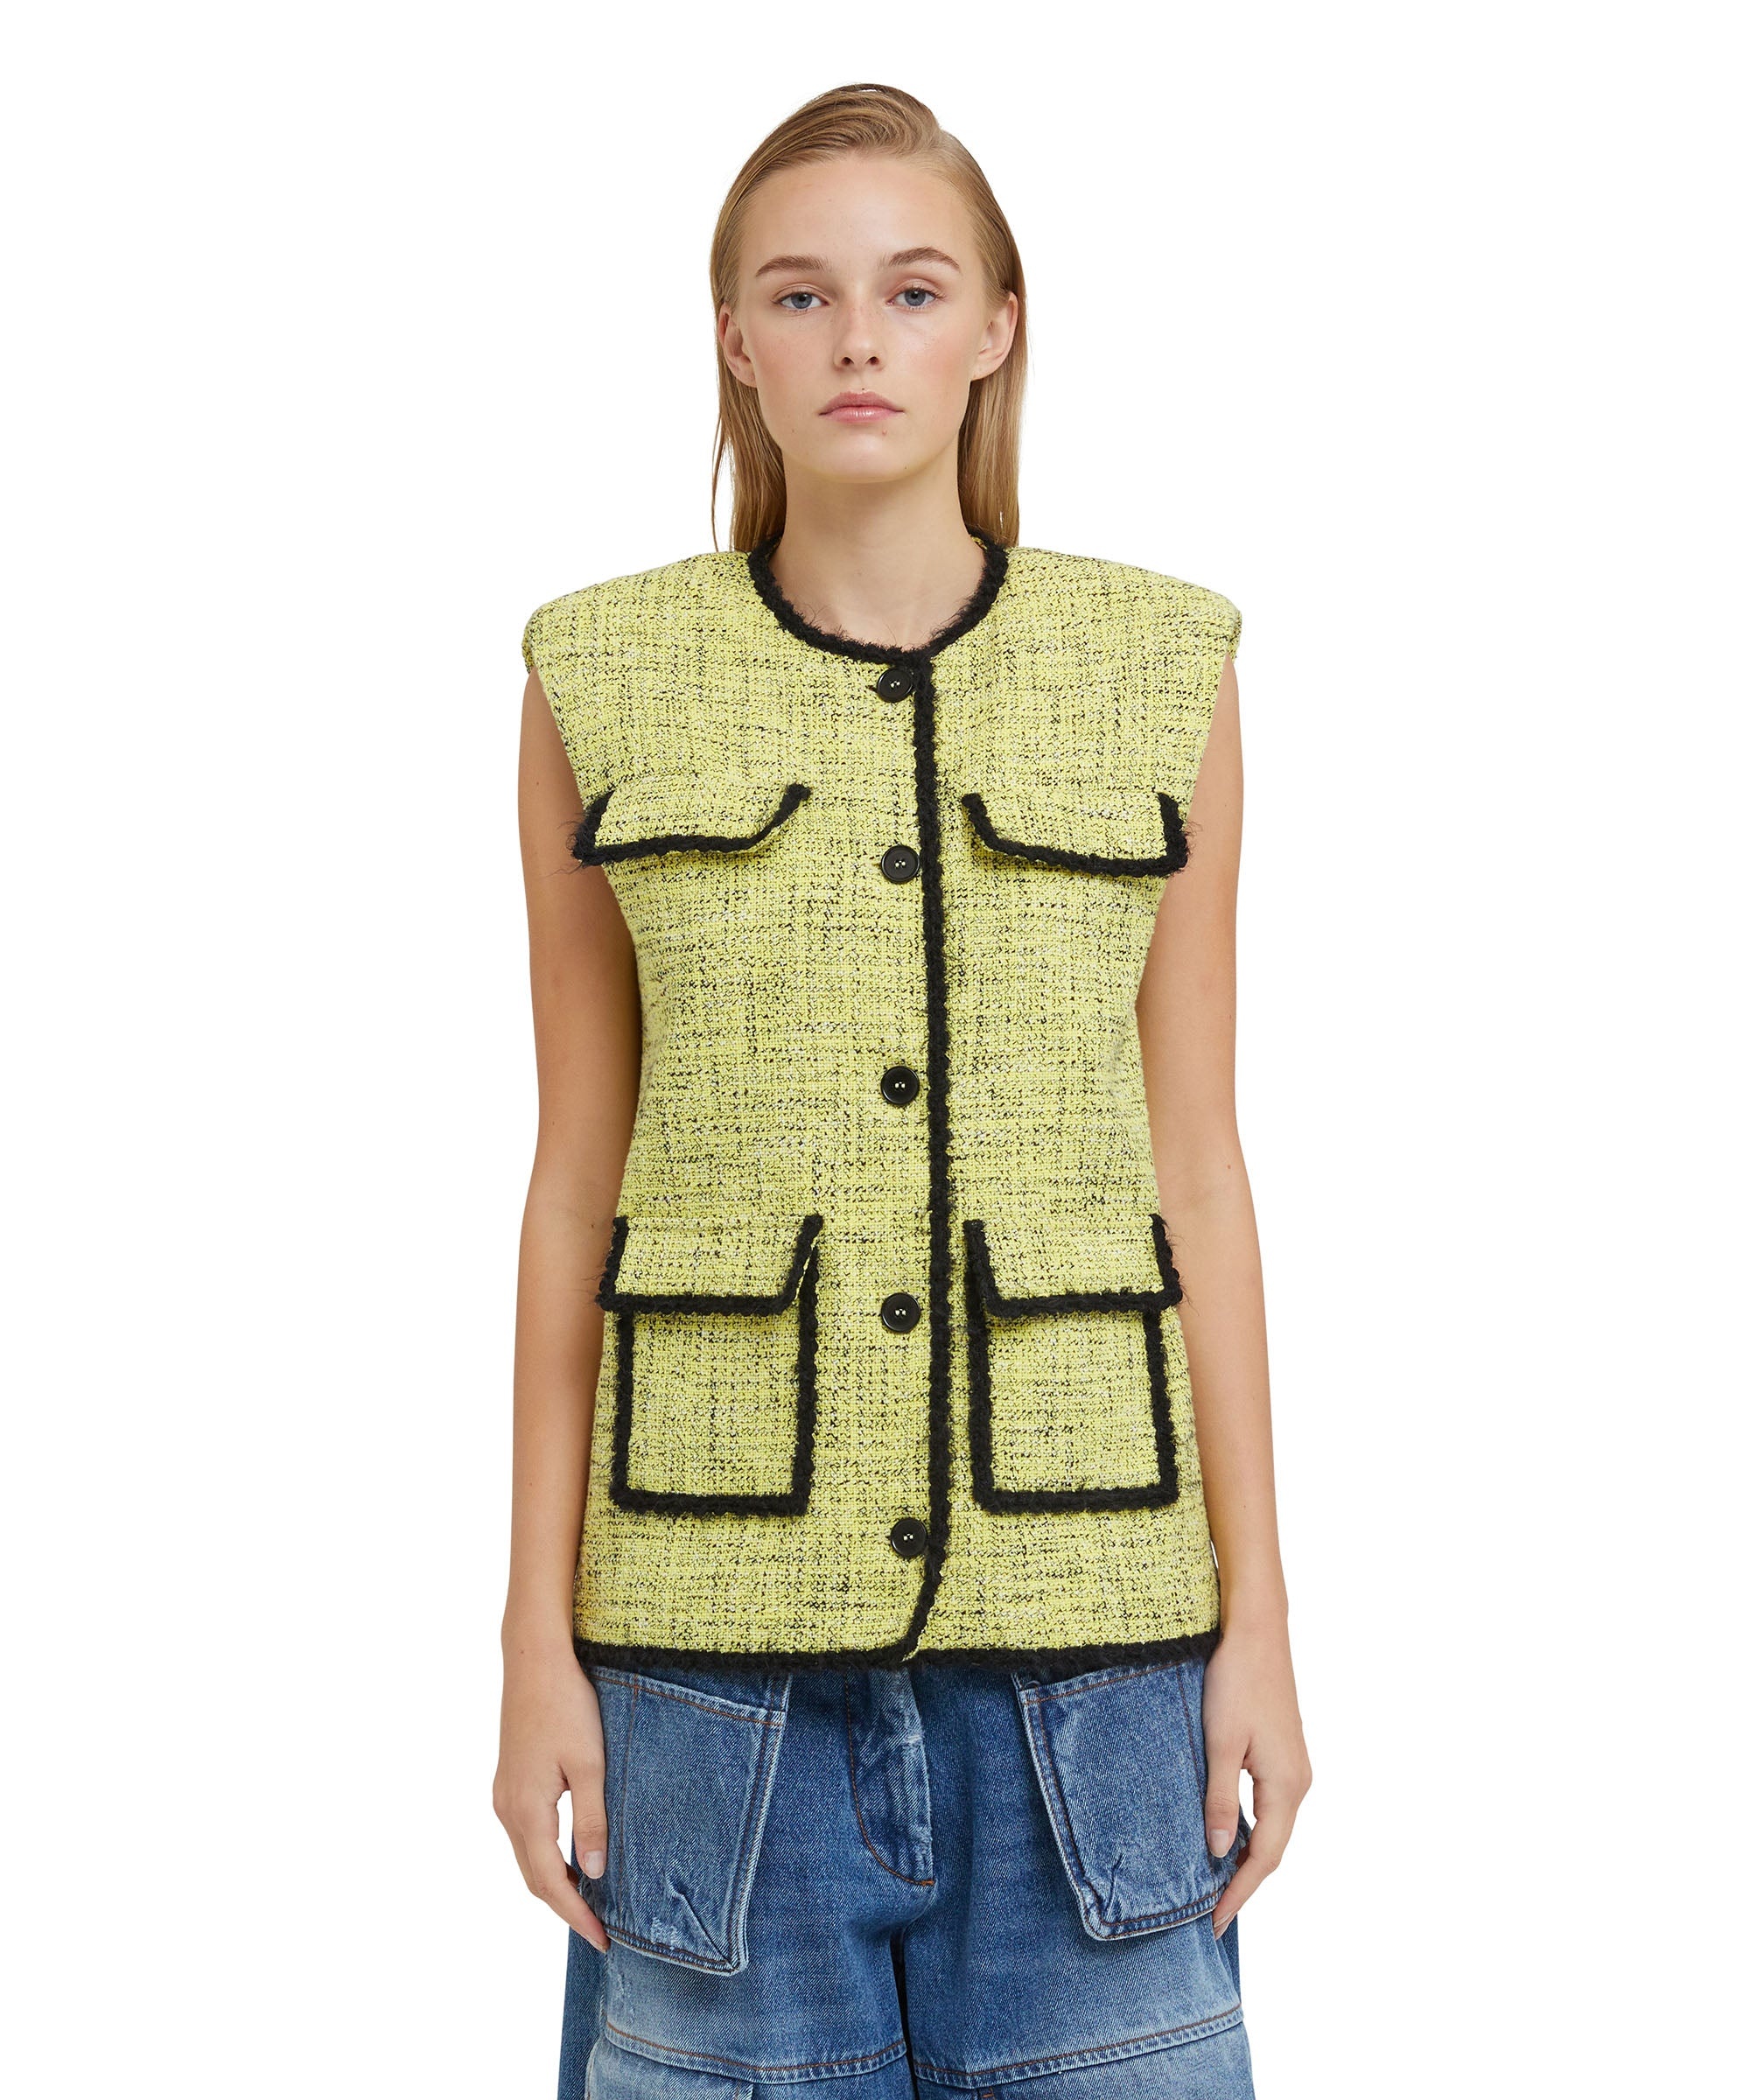 Salt and pepper tweed sleeveless jacket with pockets - 2